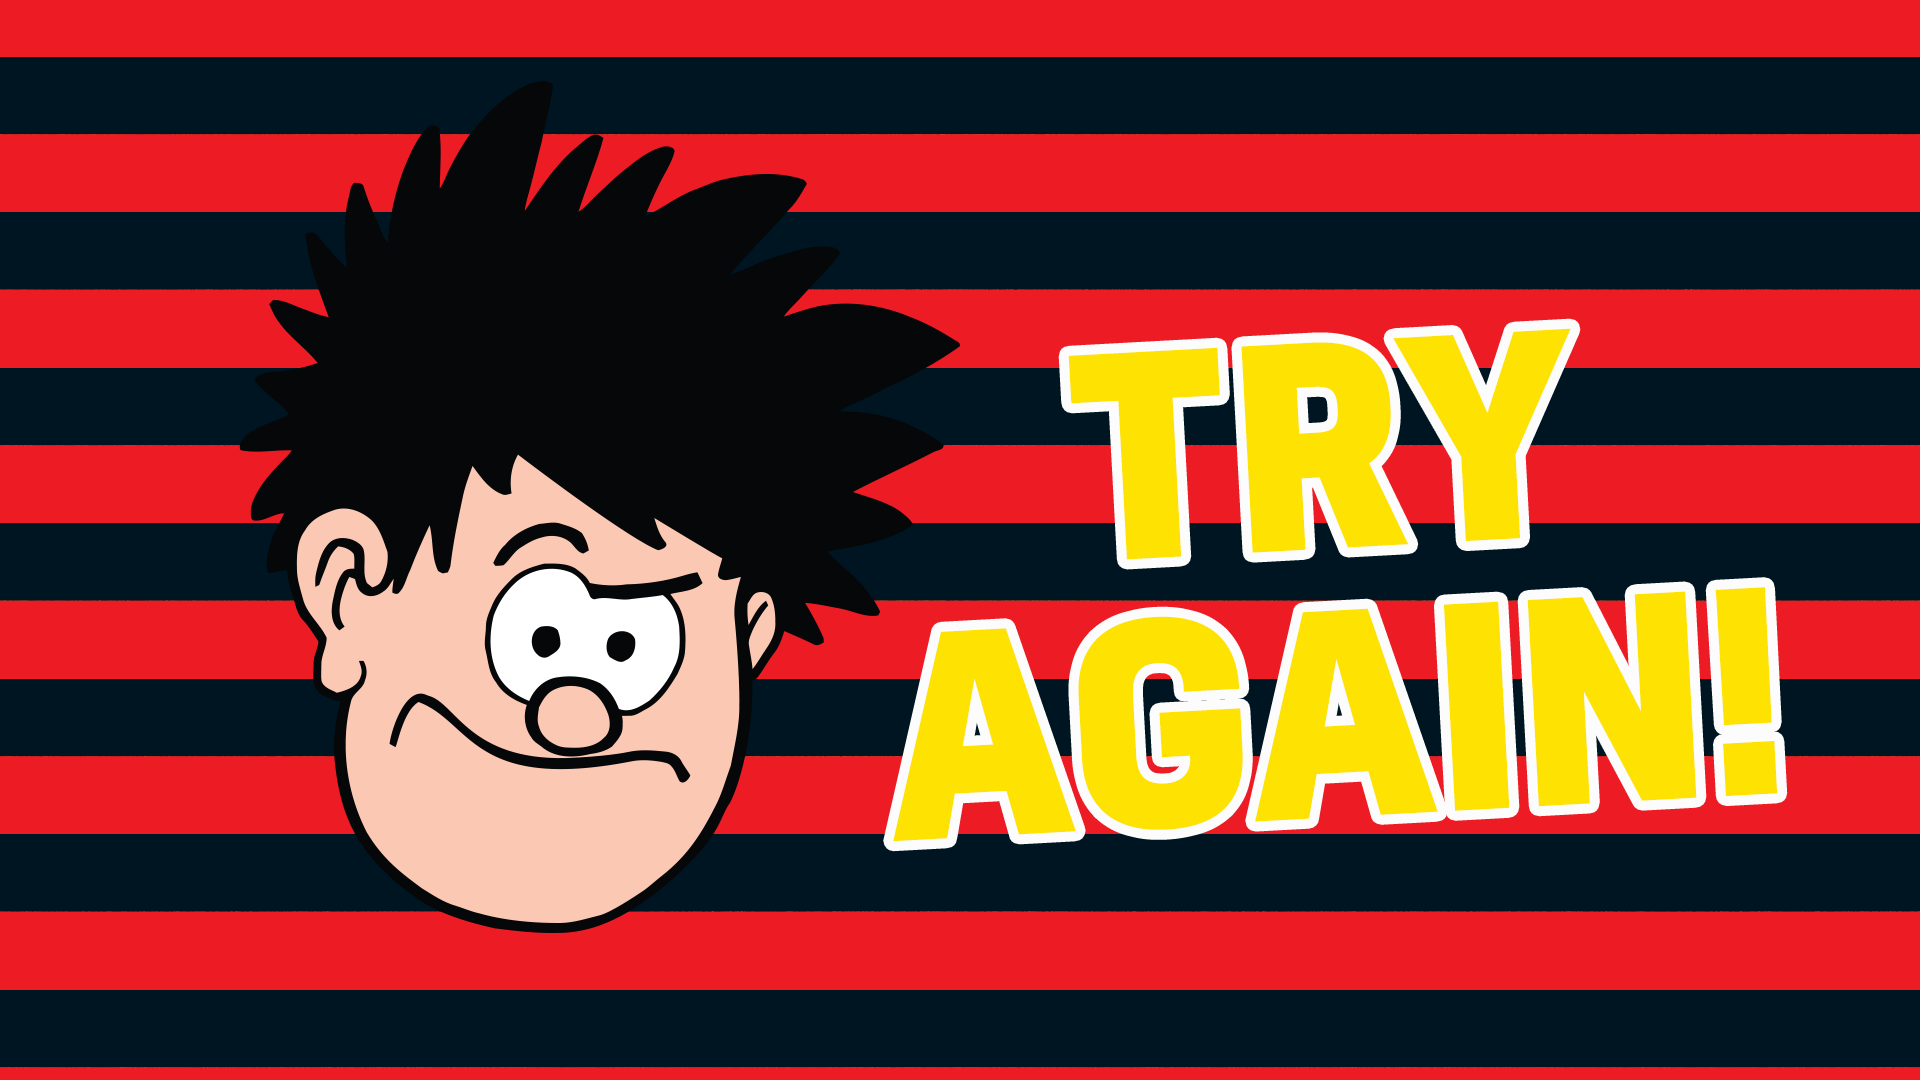 Hmm, not bad but we know you're more of a Beano fan than that! Have another go and see how well you do!